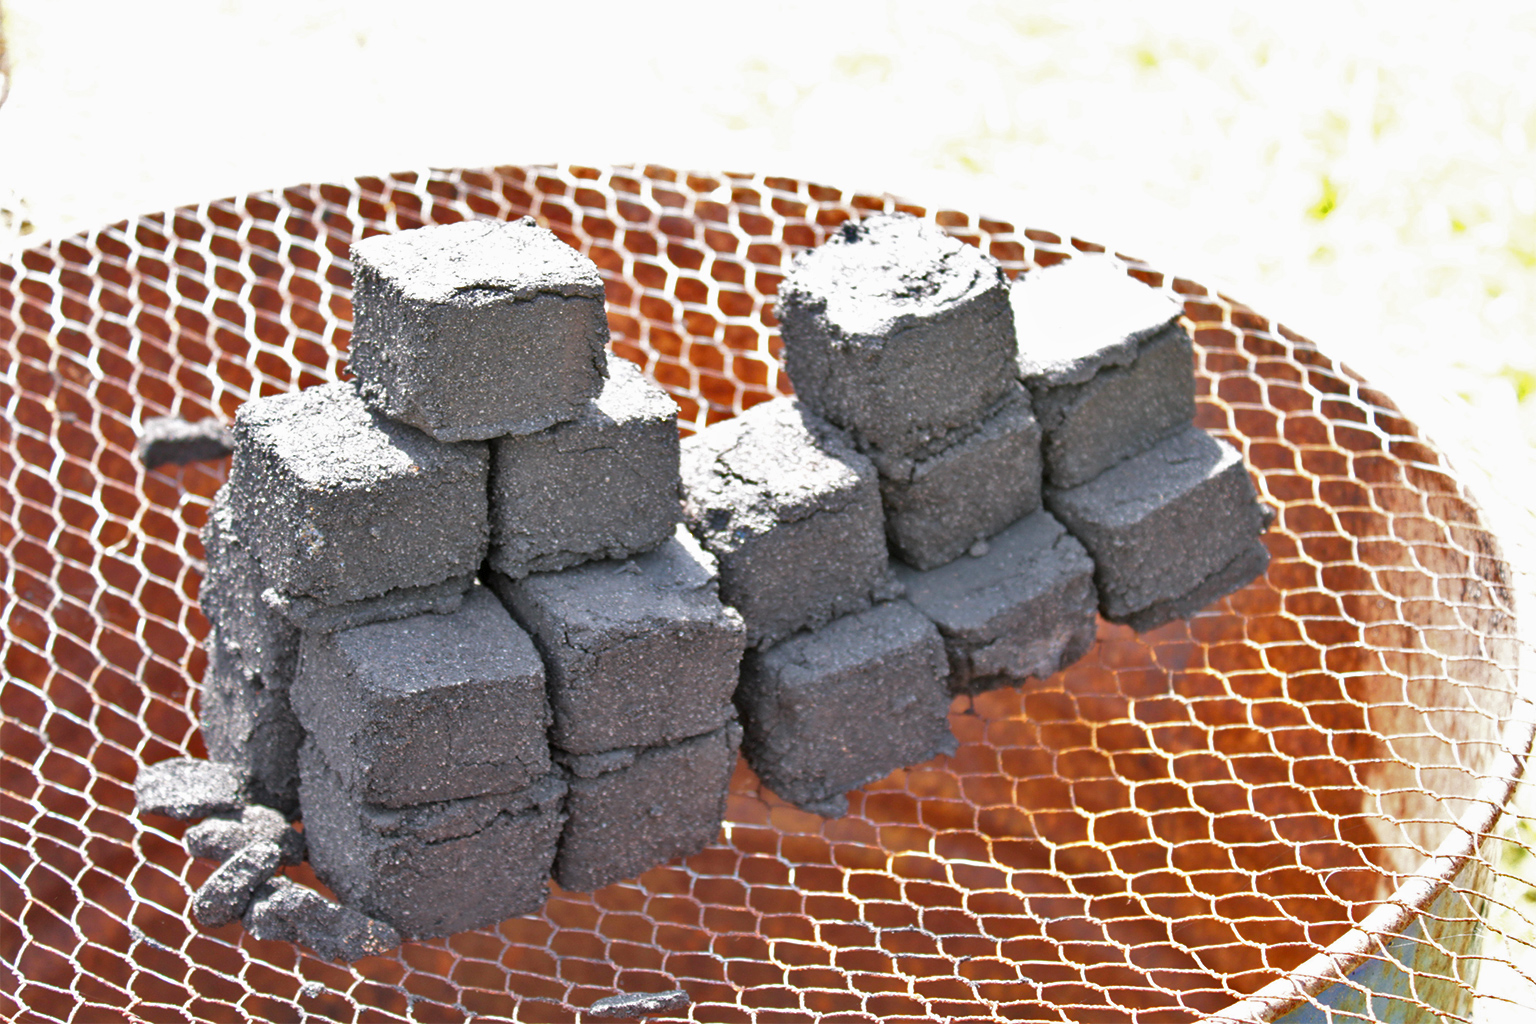 Green charcoal is an alternative to wood cutting in dry savannah areas but remains a small-scale and unsustainable solution.